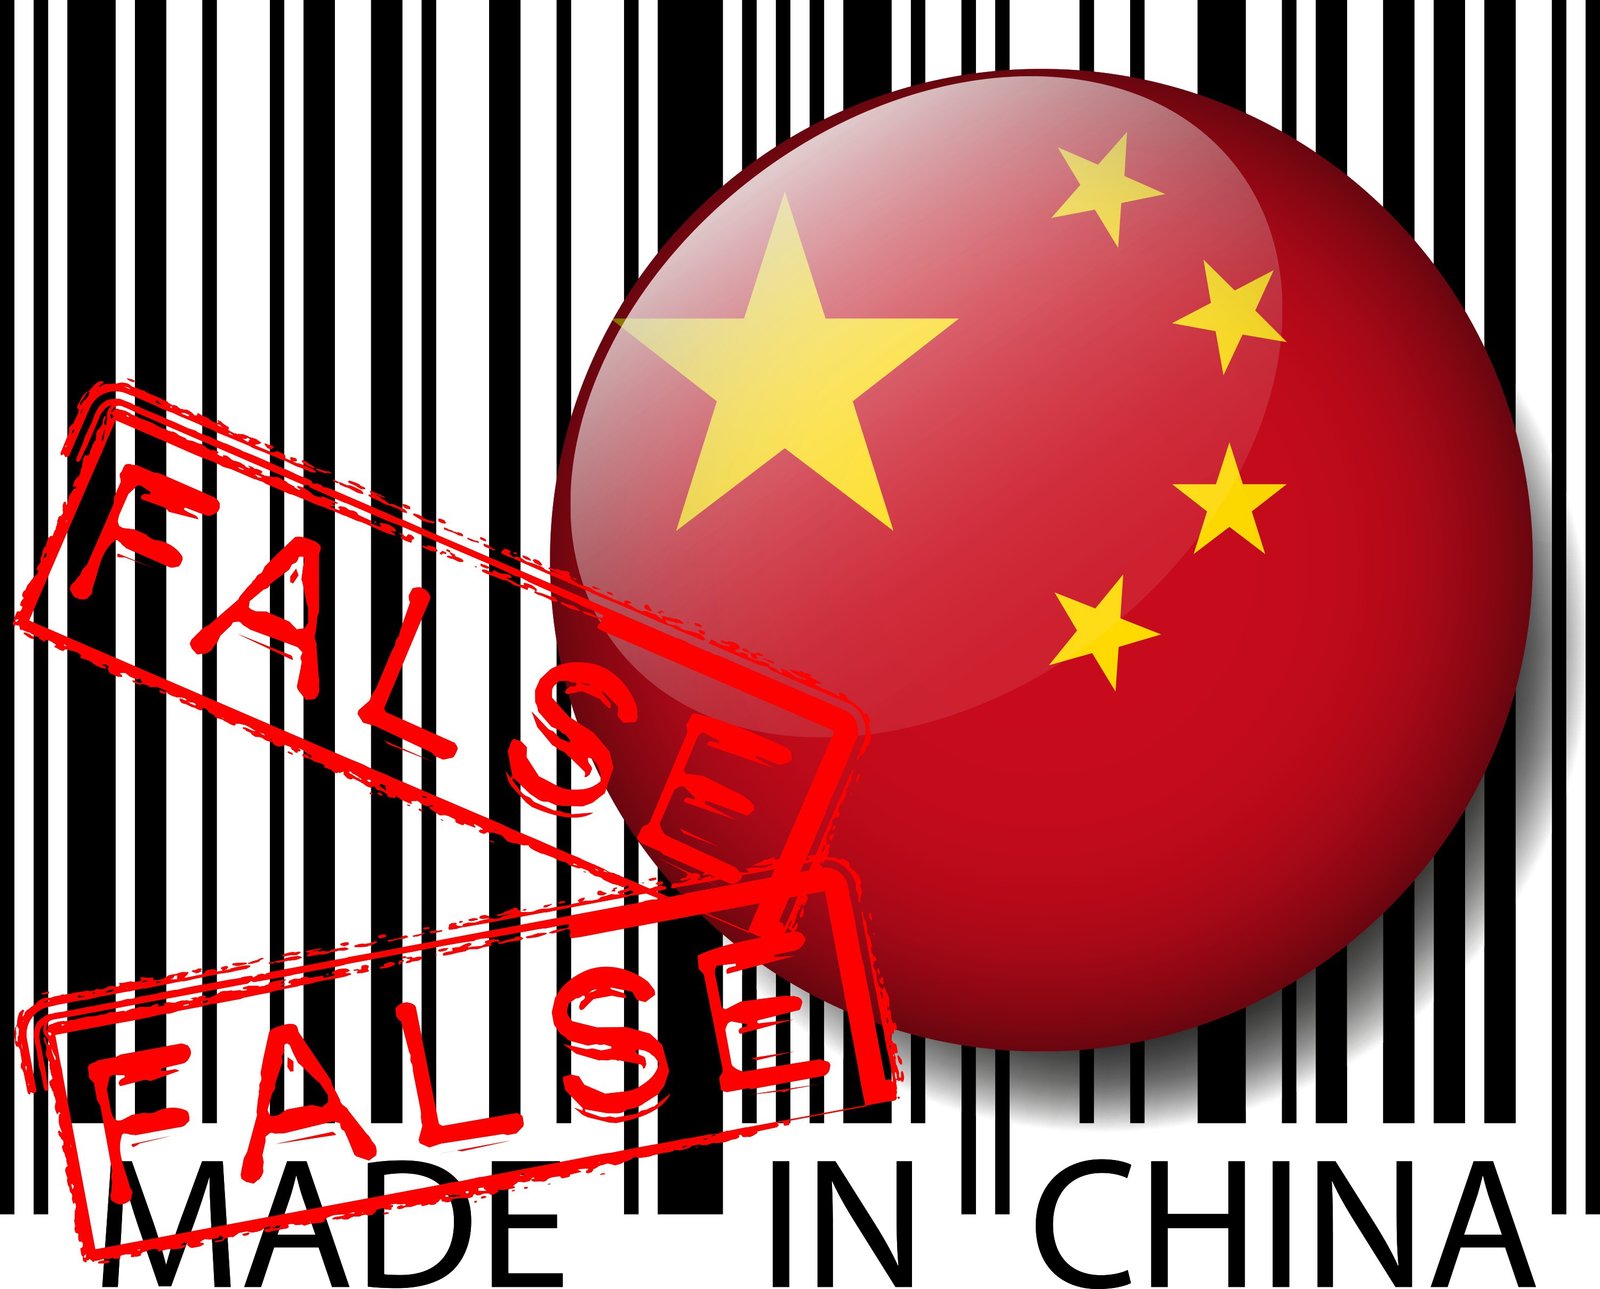 made in china